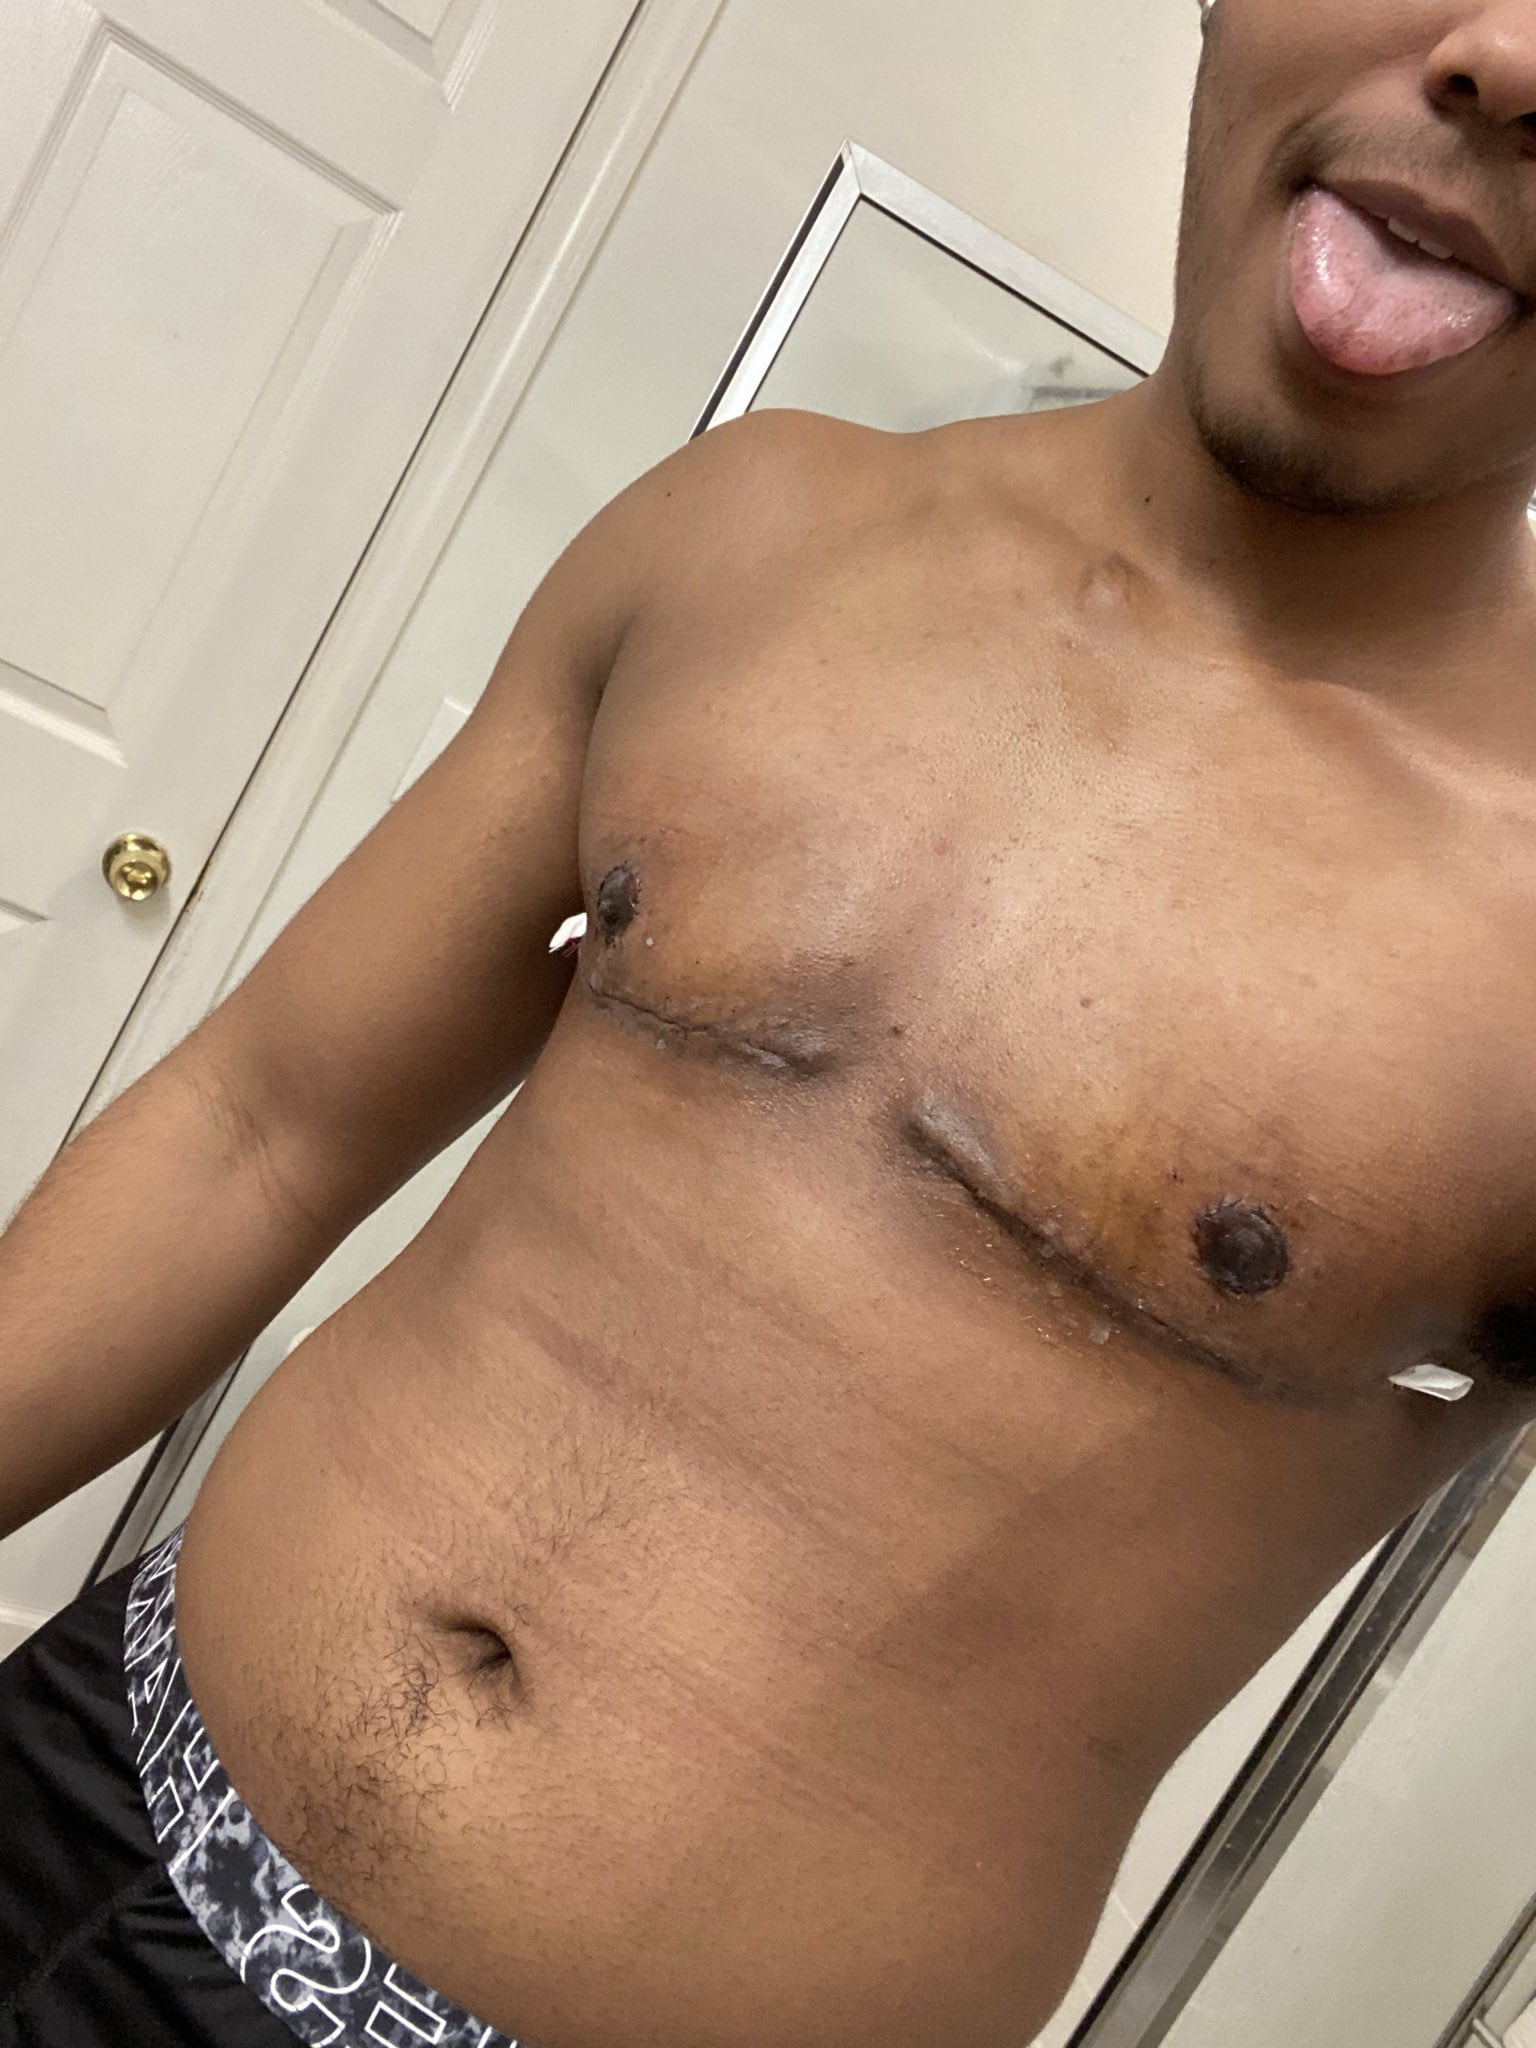 Trans Man displays his chest after removing his breast through surgery - Photos 2